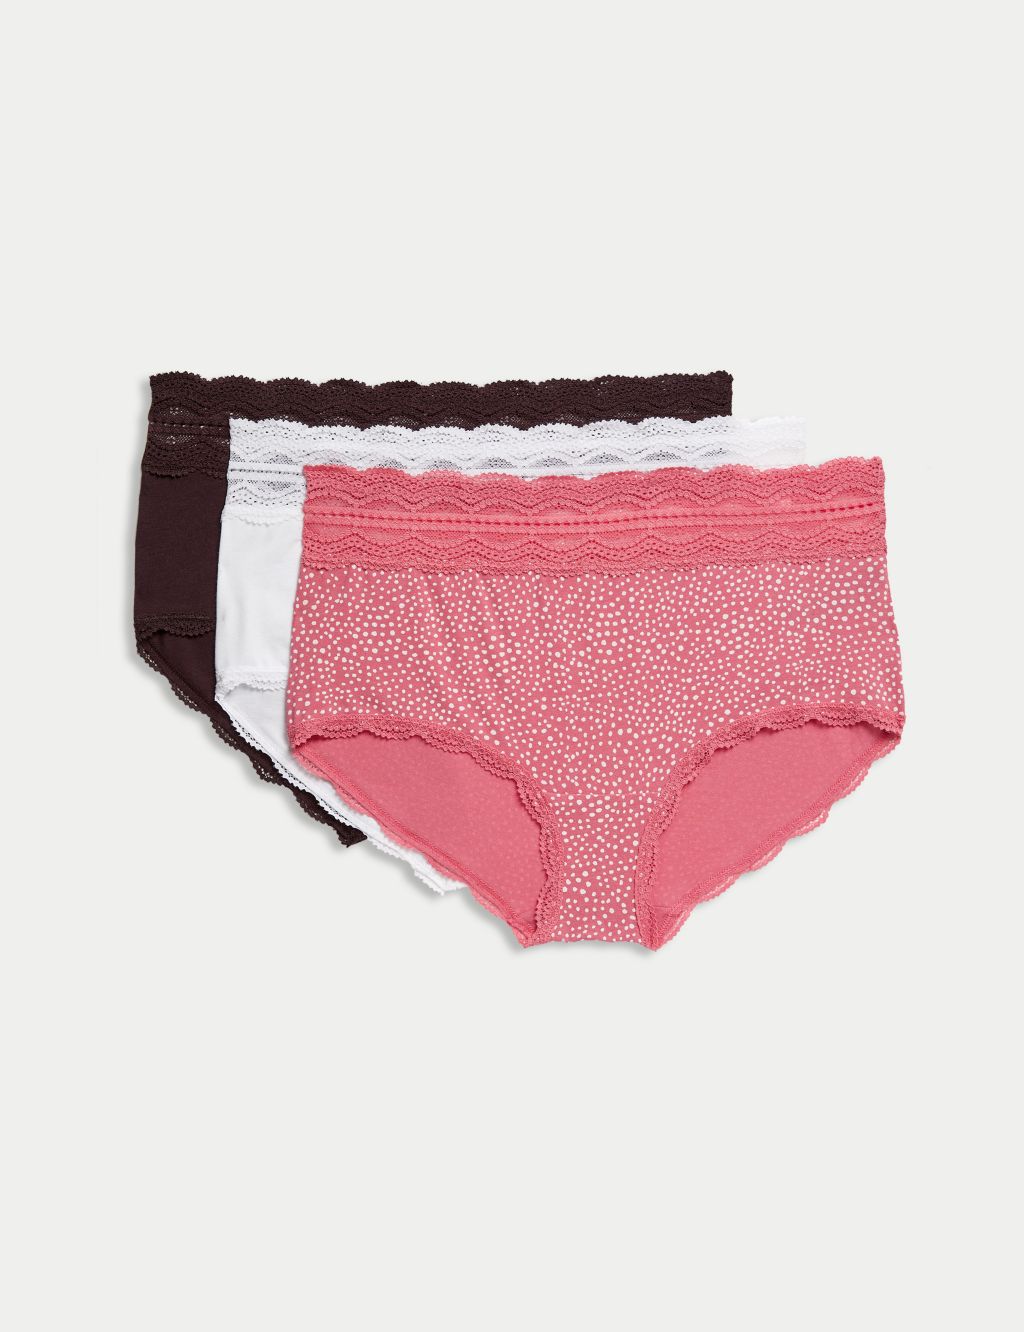 Laura Ashley U.S. Polo Assn. 3 Pack Intimates Panty S M L XL Assorted Color  New 